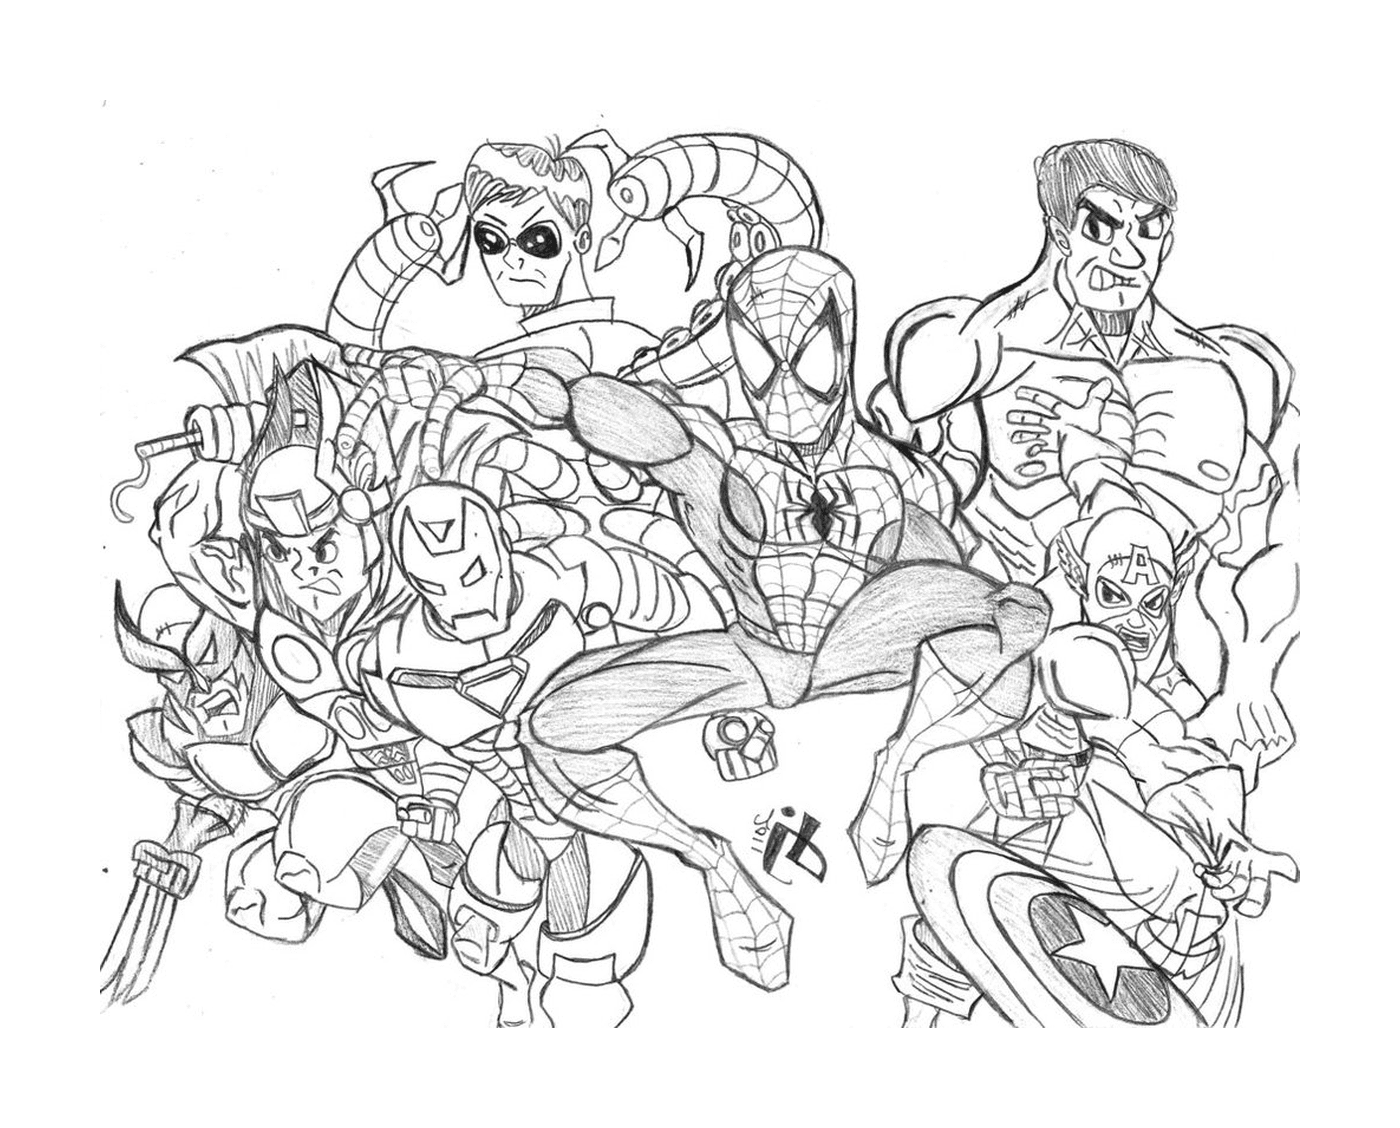  A group of superheroes drawn 